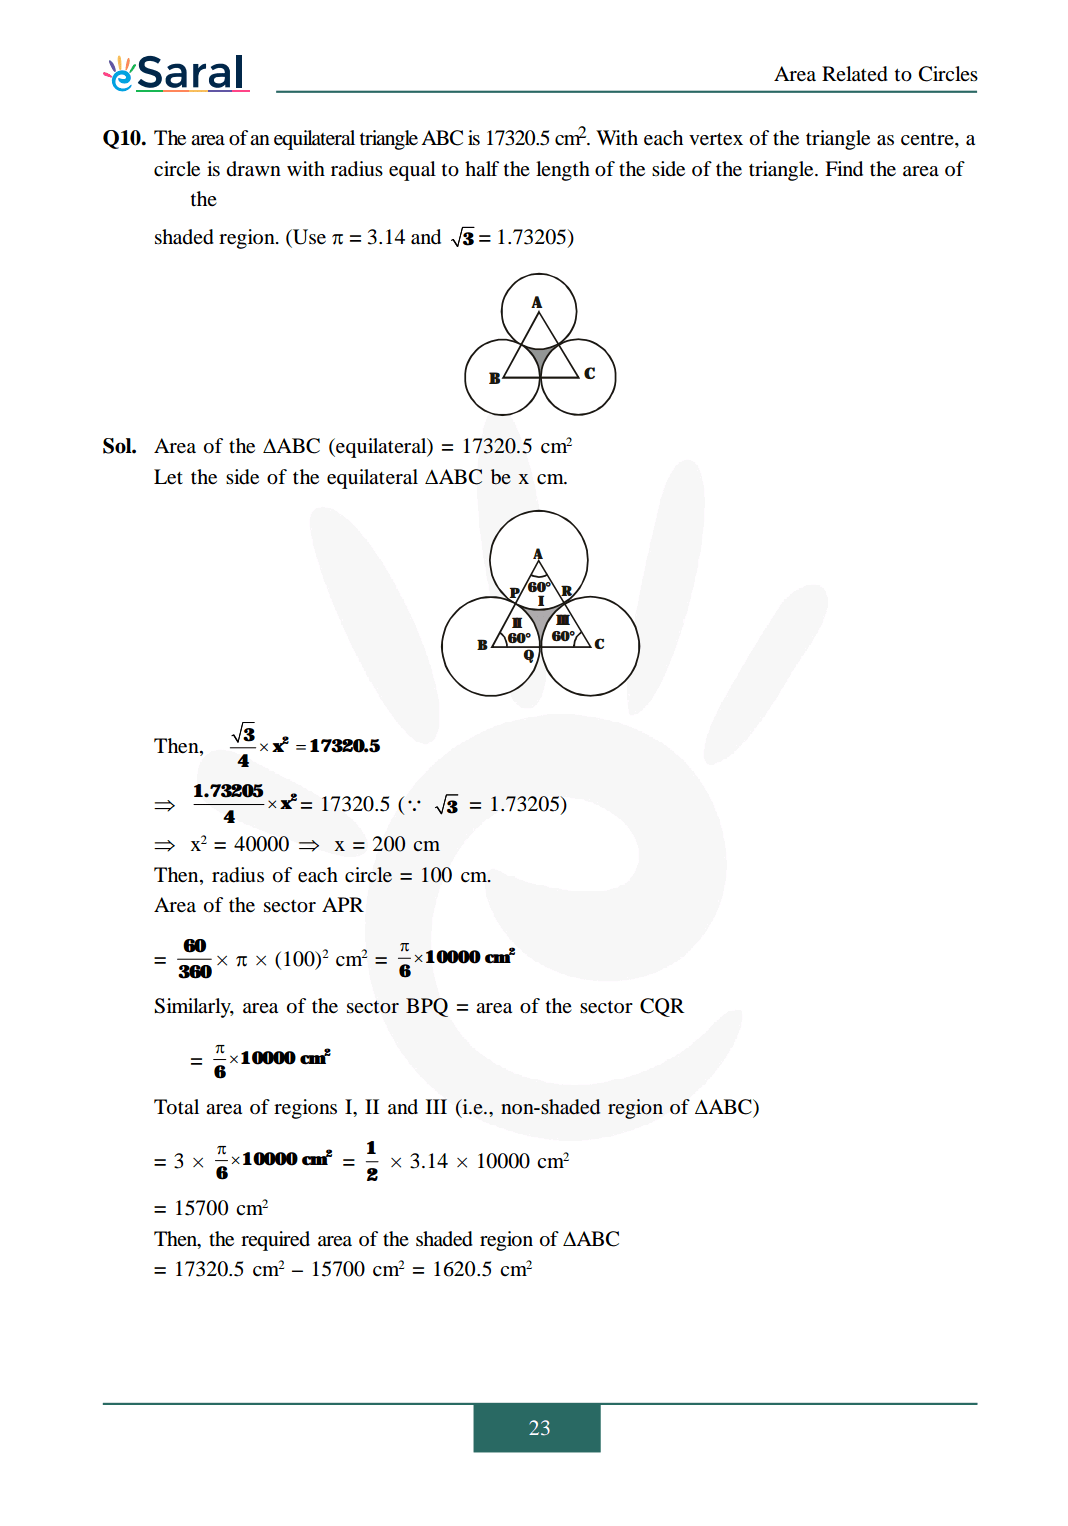 Chapter 12 exercise 12.3 solutions Image 9